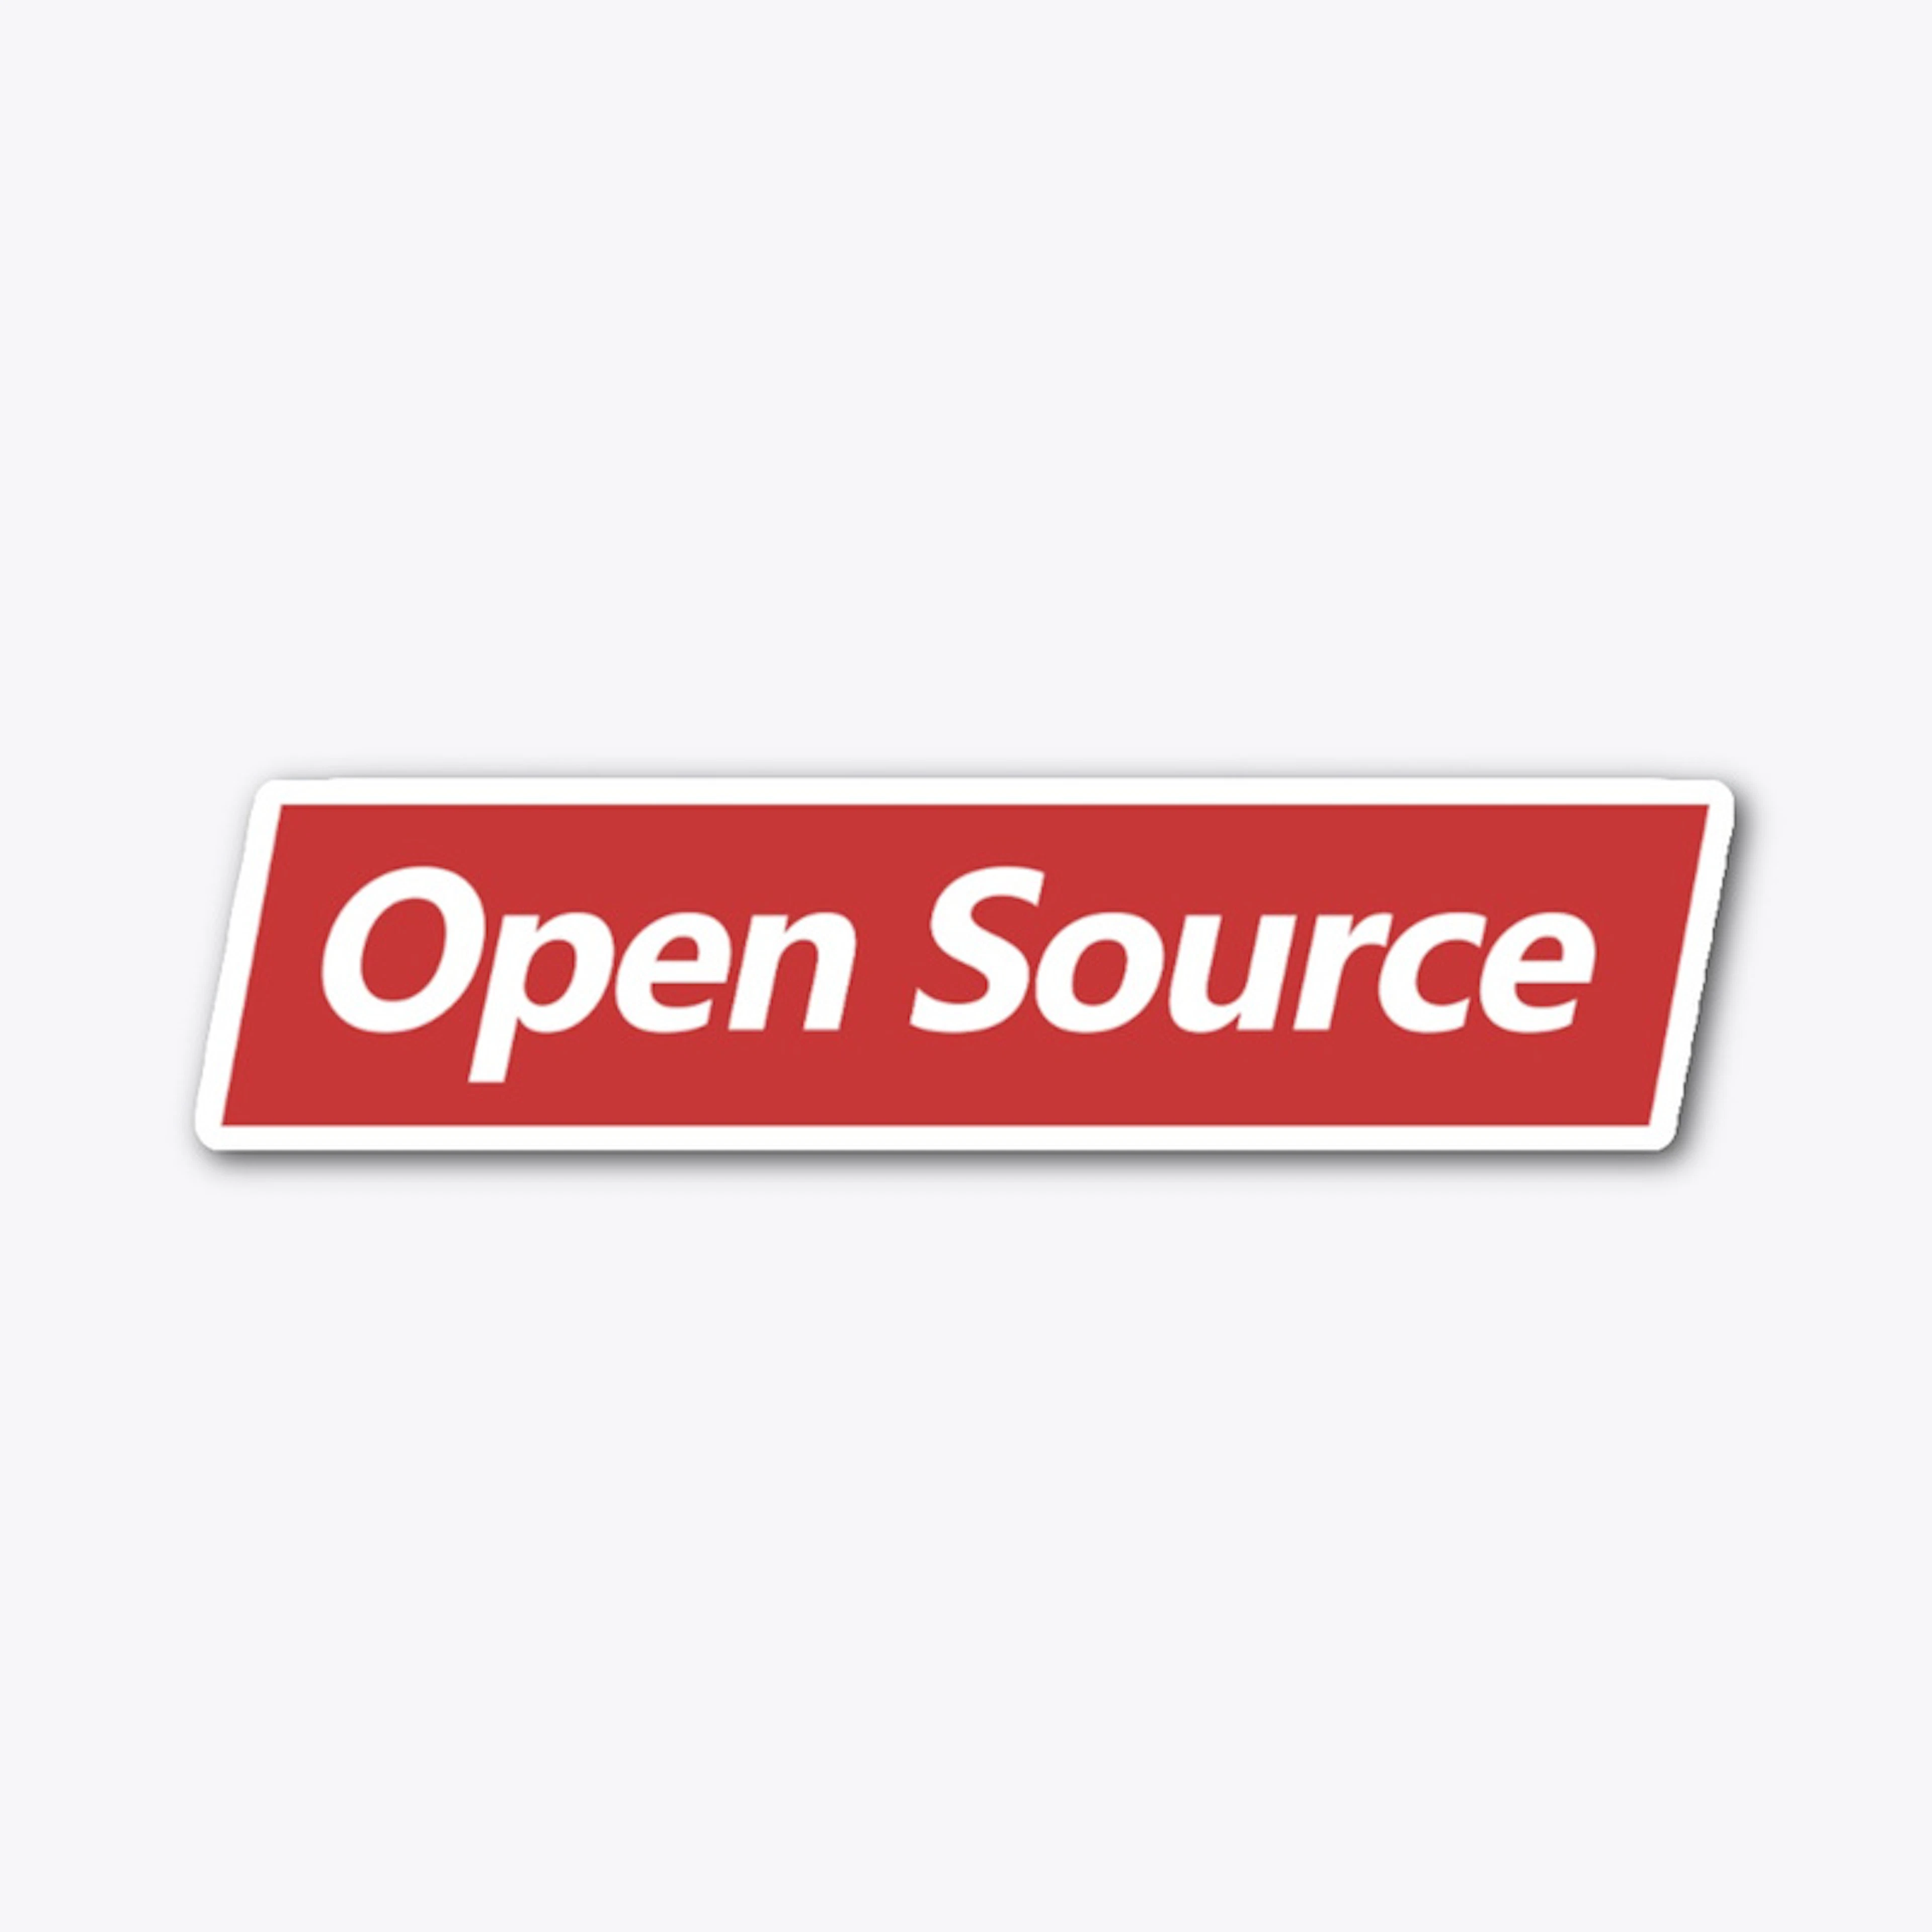 Open Source in a Skewed Red Box